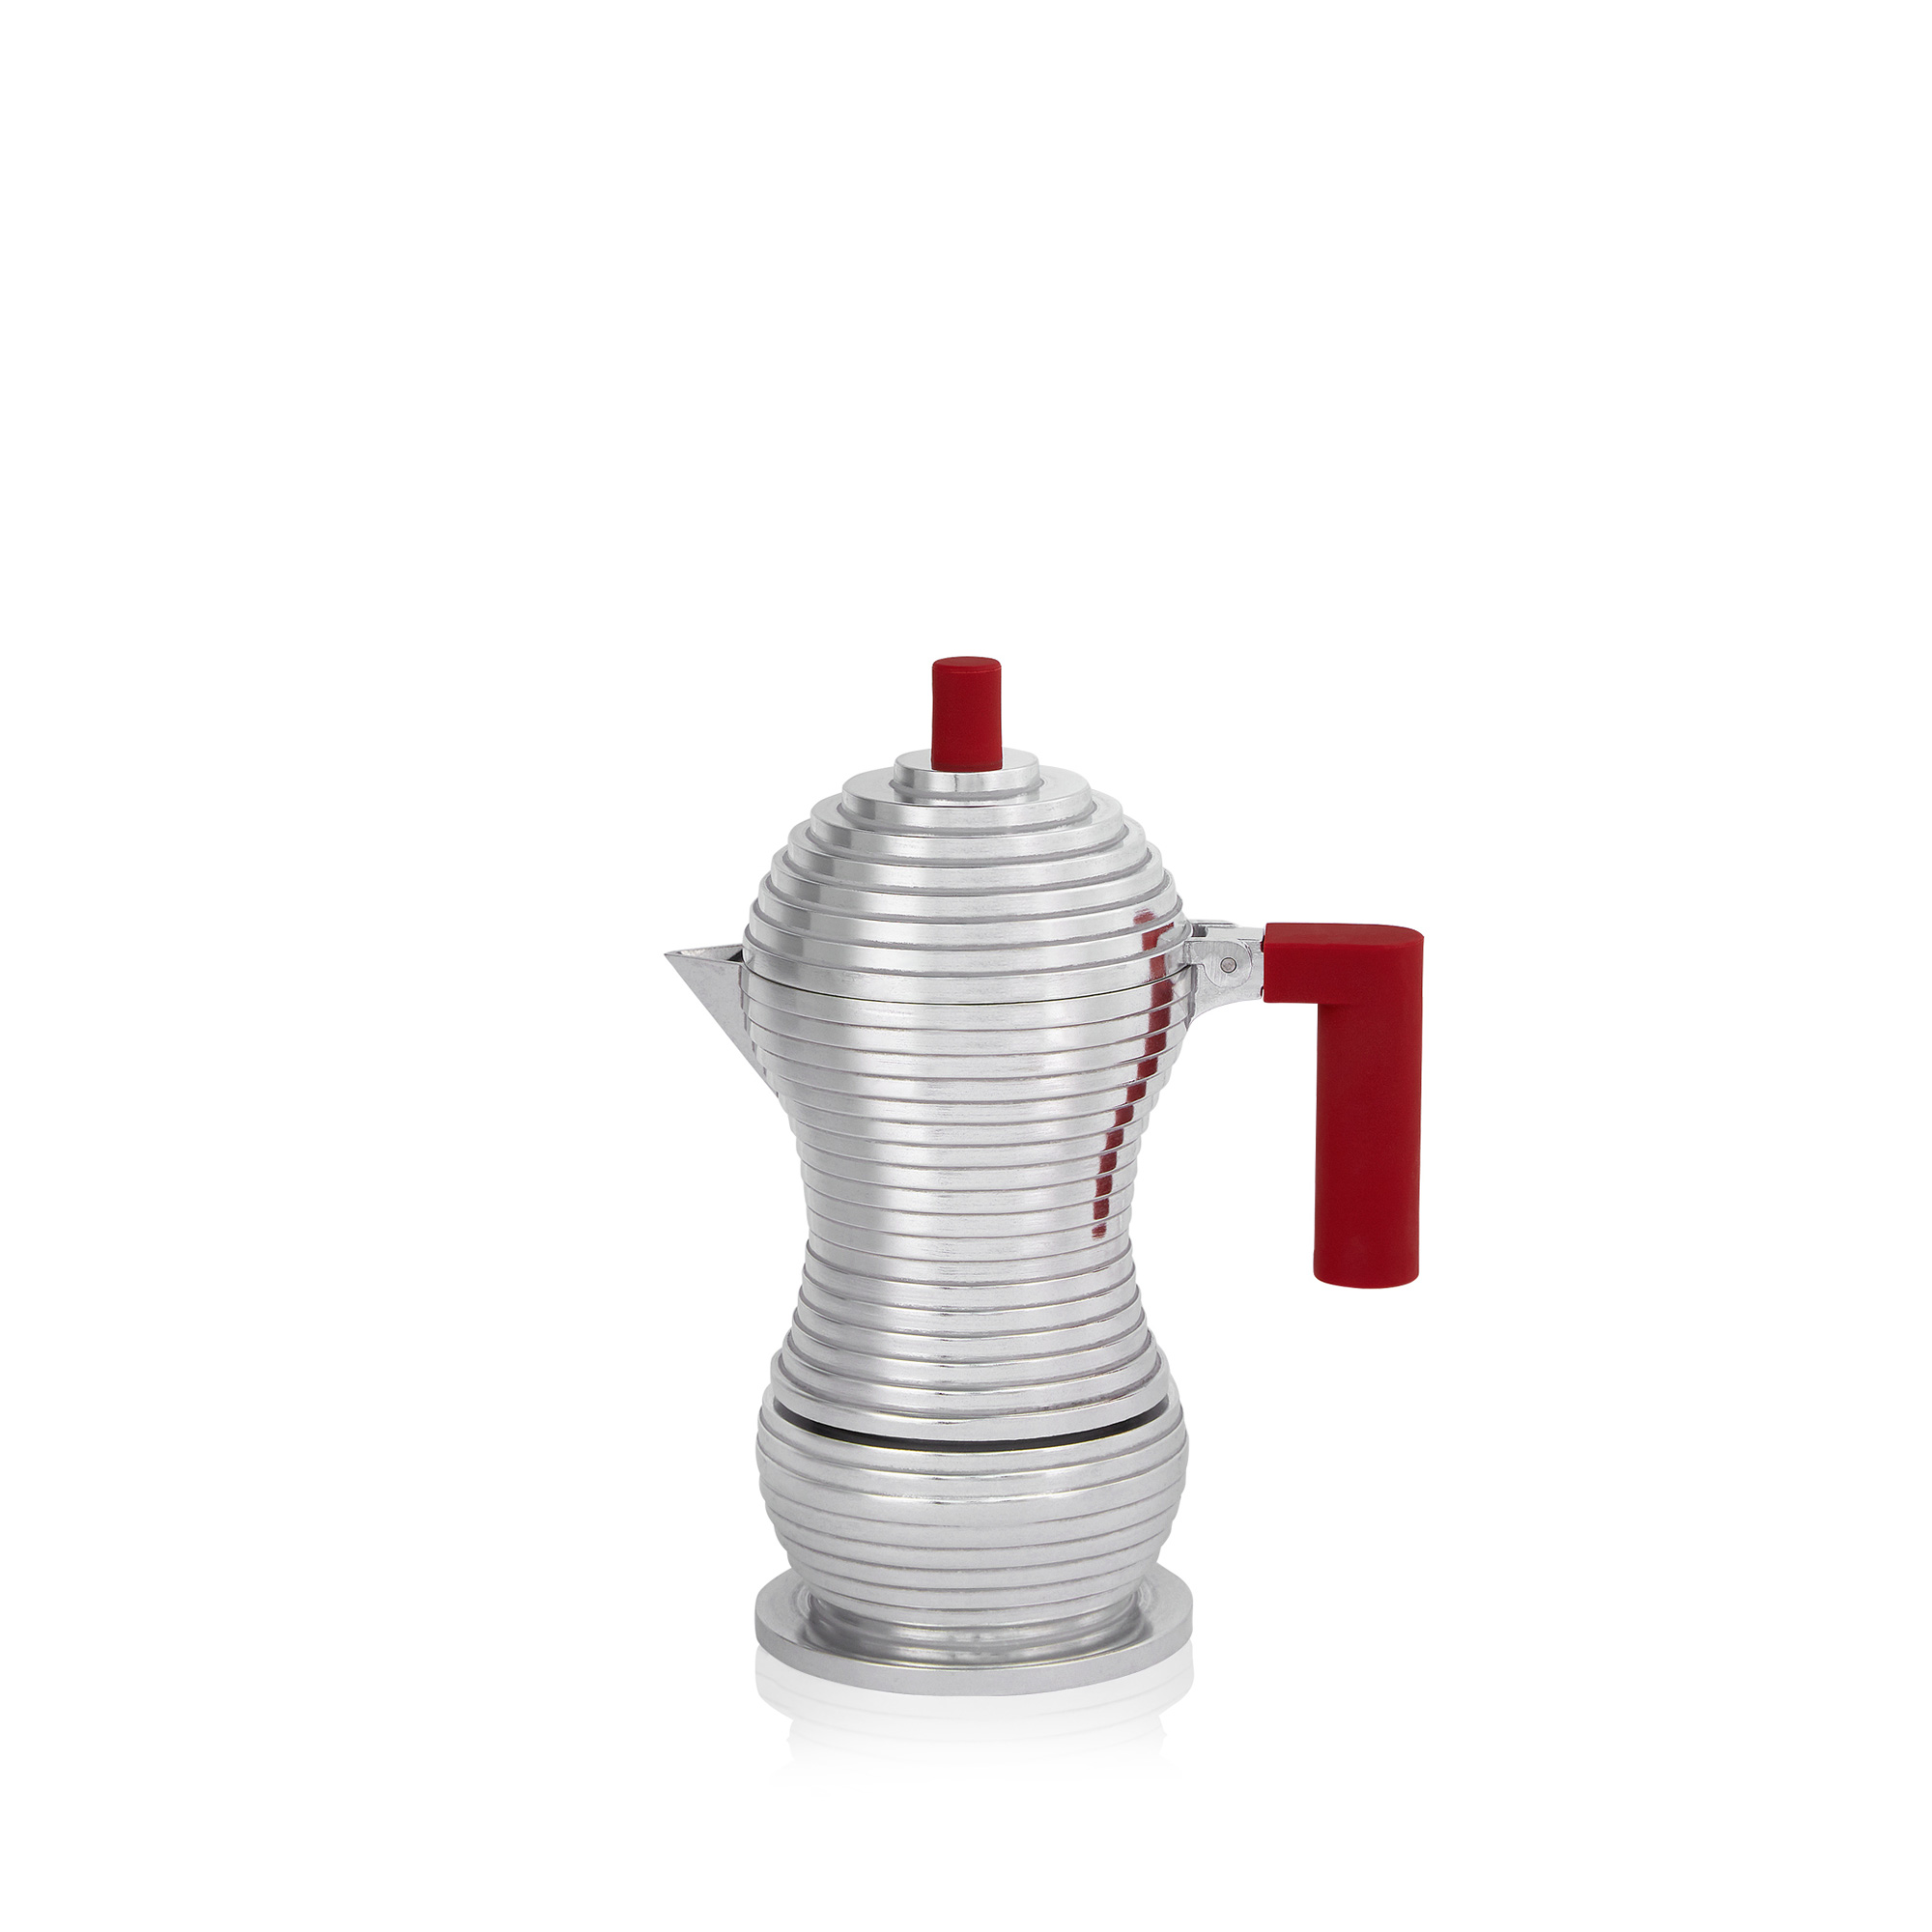 From the collaboration of Alessi and illy, the Pulcini combines the technological expertise of illy with Alessi's impeccable design.  This ground breaking moka pot is designed to enhance the coffee's aroma, featuring a unique shape that is ideal to achieve optimal coffee extraction. Made from aluminum, an excellent conductor of heat, it can be used on gas, electric, and glass ceramic cooktops. Packaged in a pop-art style designer box.  1 Cup capacity. (L: 5" W: 3" H: 6.5")